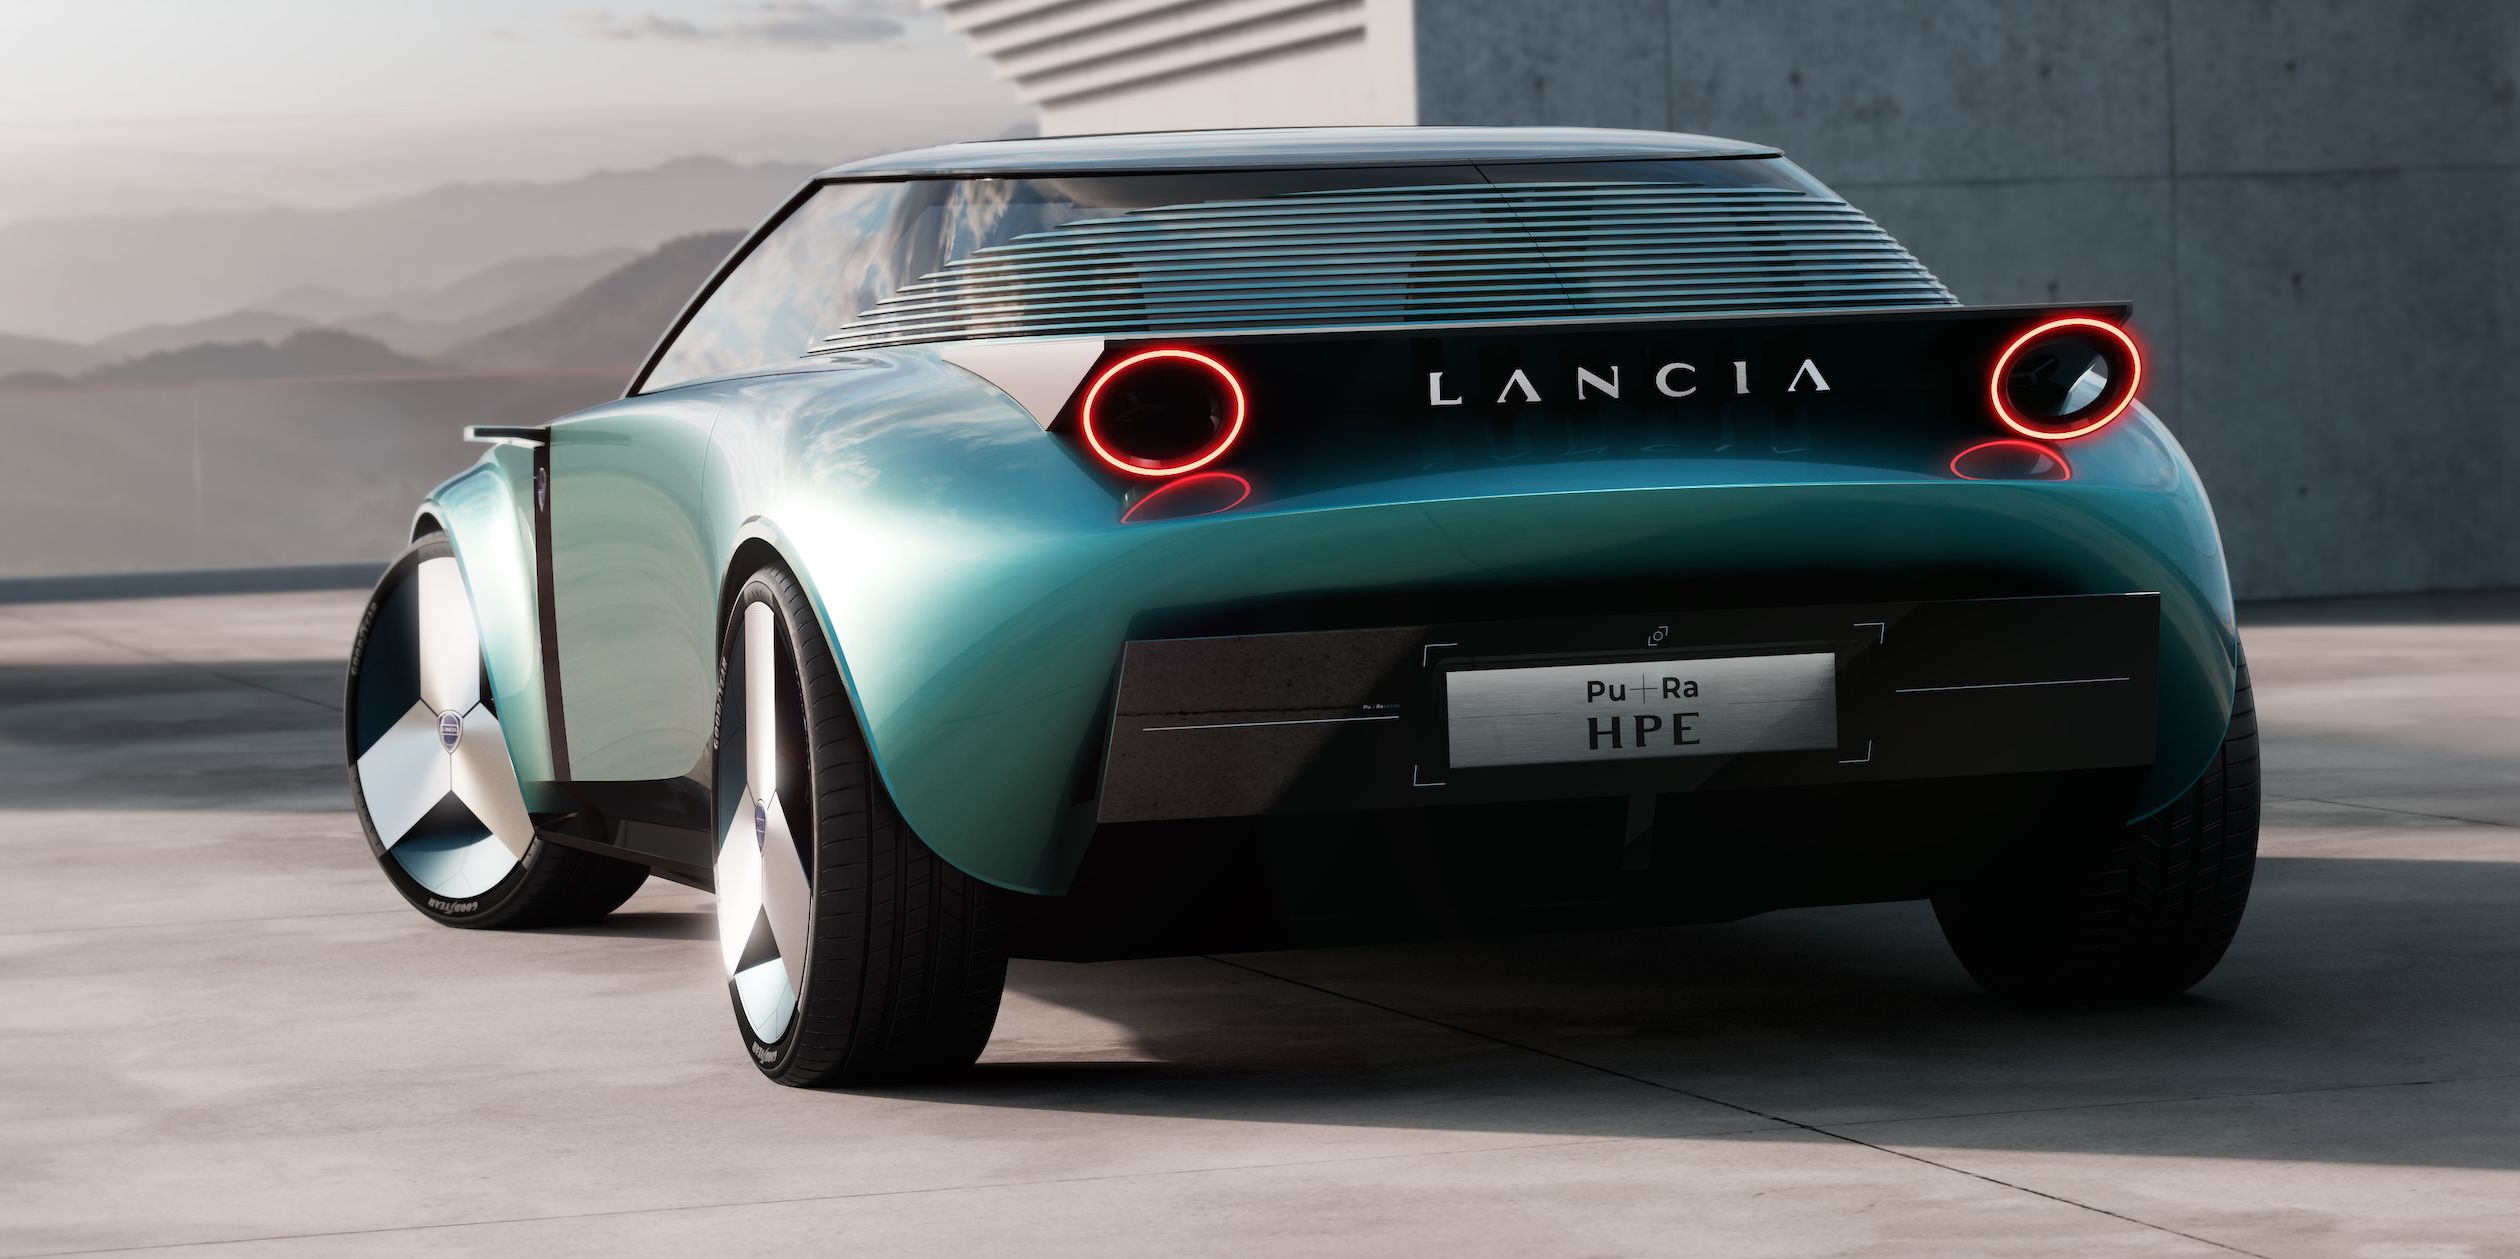 The Lancia Pu+Ra HPE Is a Look at the Future of the Historic Italian Brand